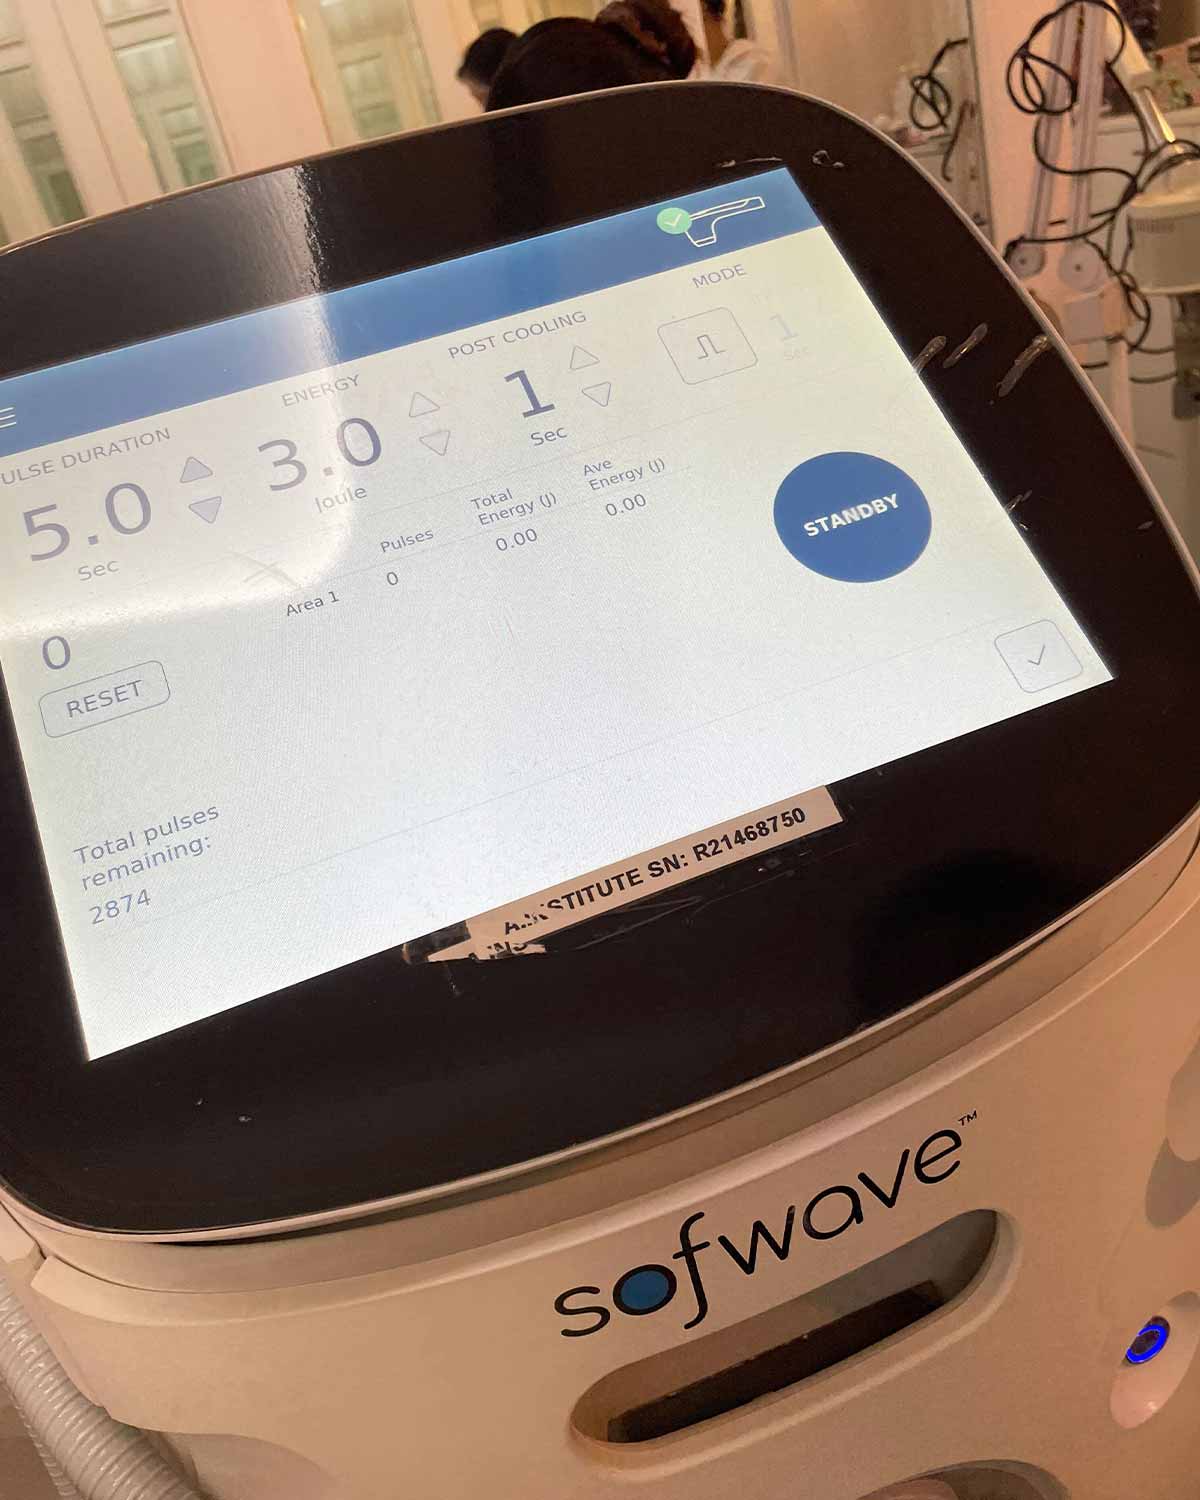 aivee sofwave review